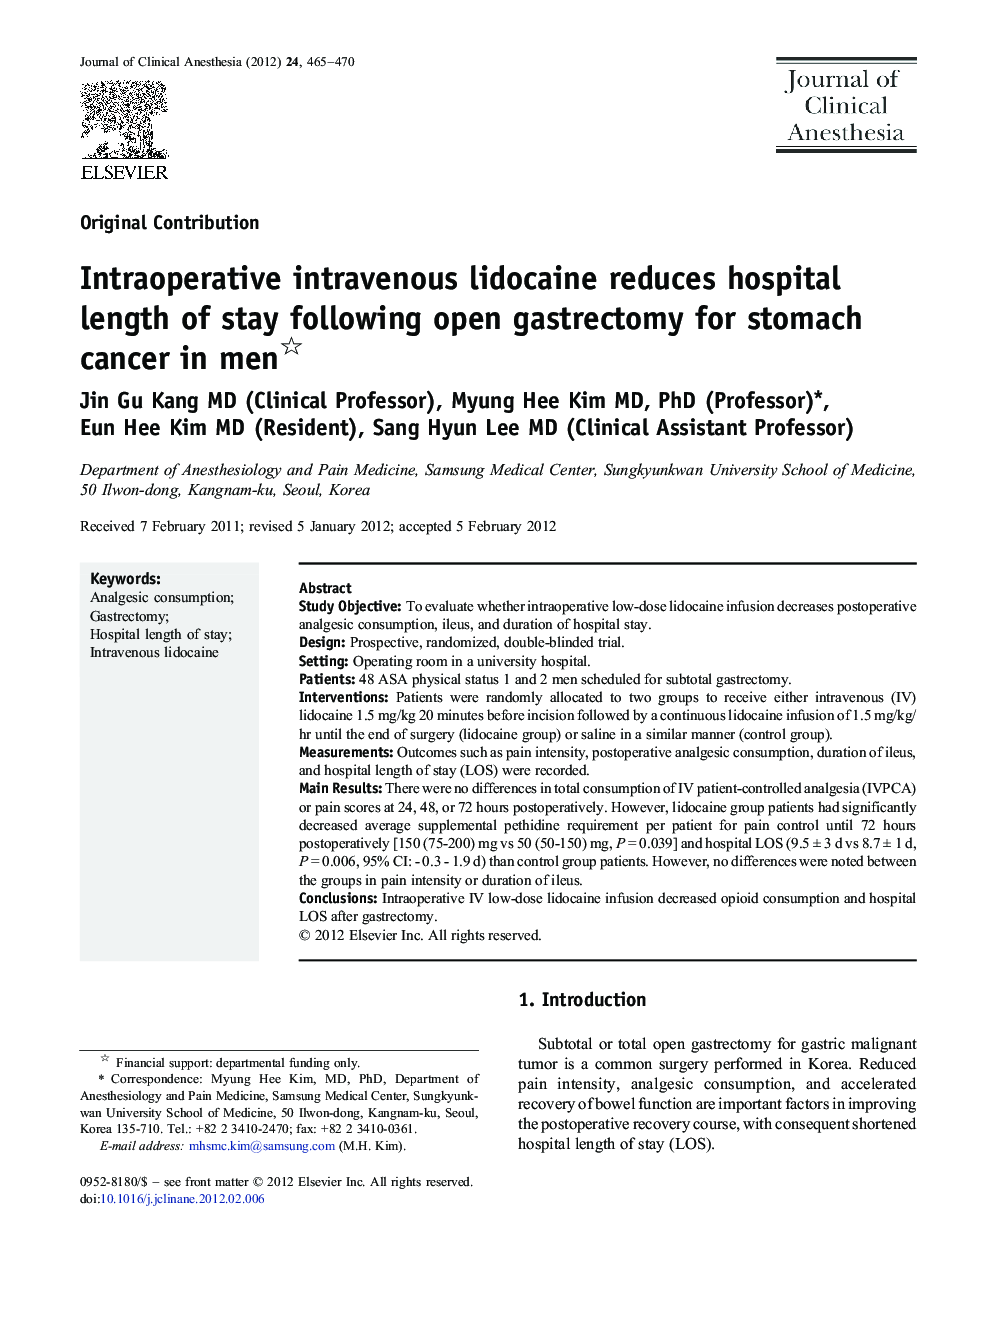 Intraoperative intravenous lidocaine reduces hospital length of stay following open gastrectomy for stomach cancer in men 